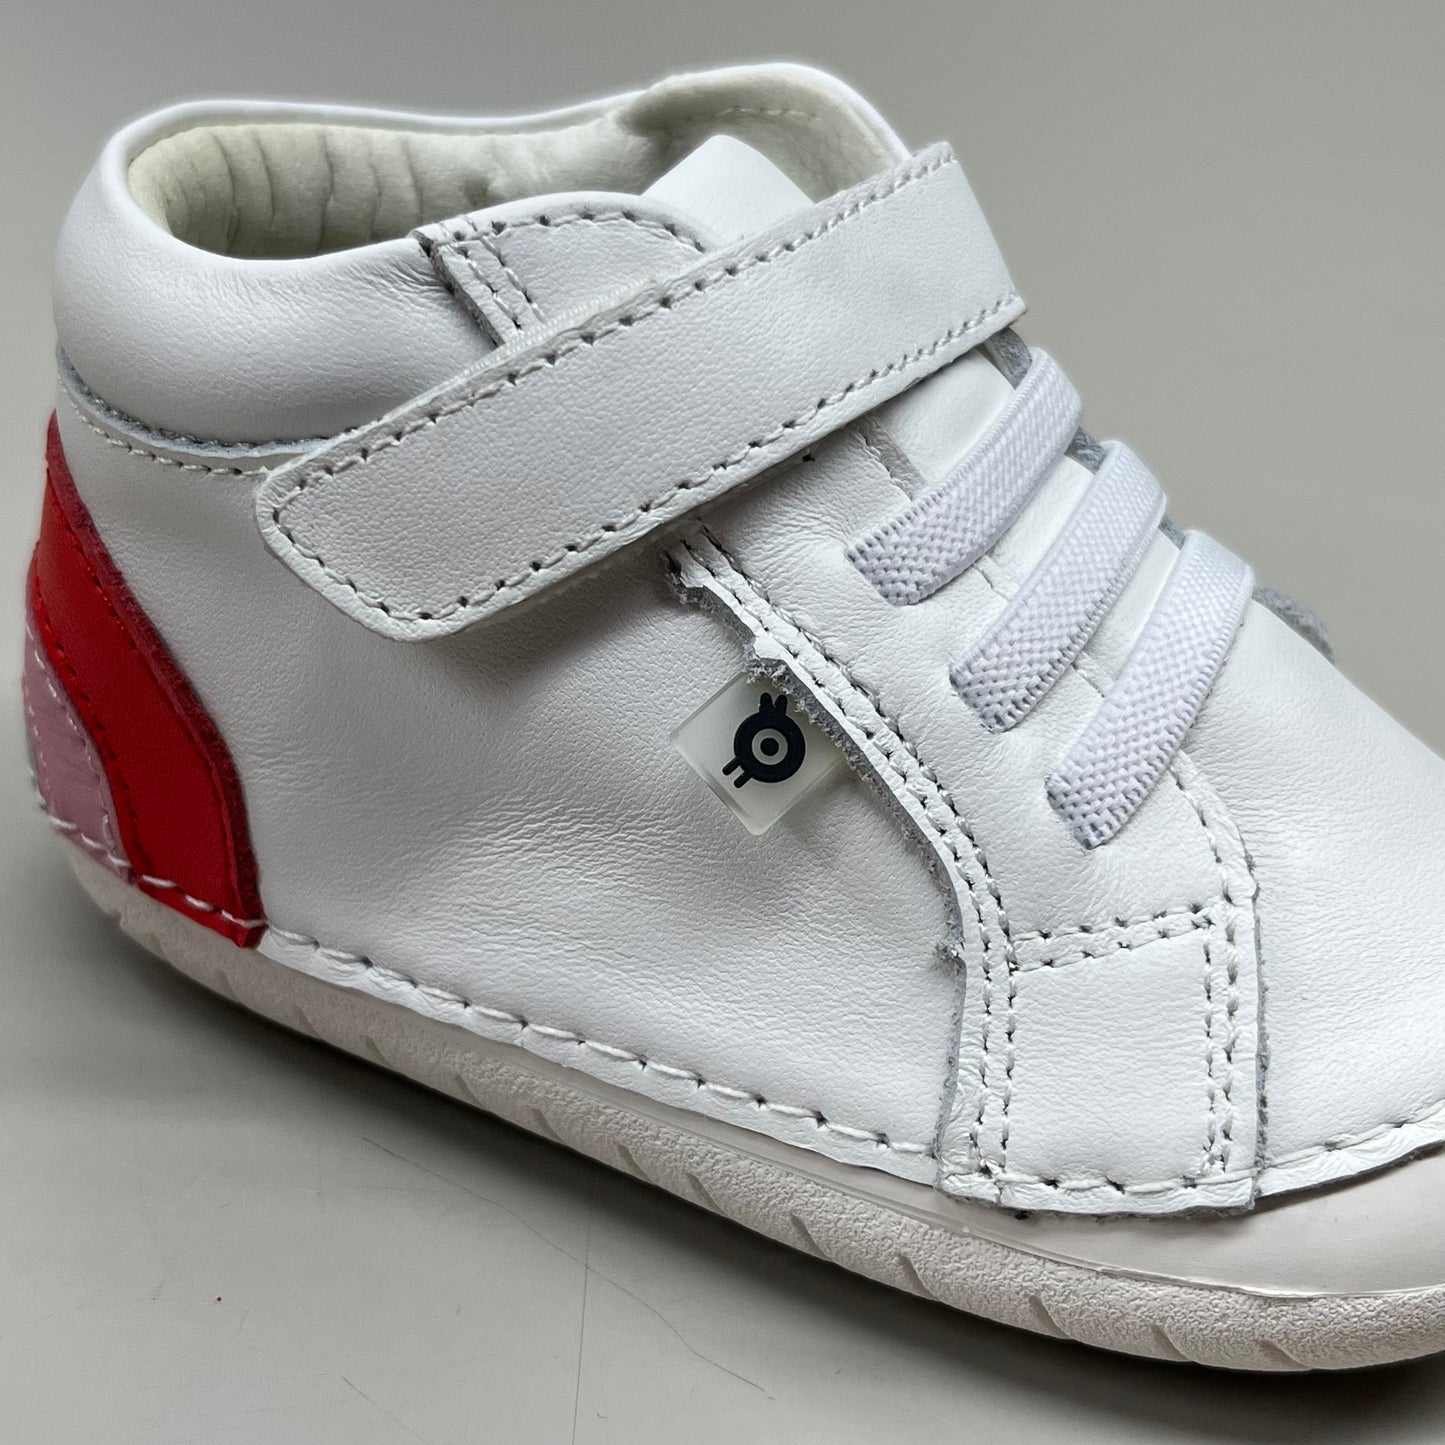 OLD SOLES Baby Champster Leather Shoe Sz 19 US 3 Snow/Red/ Pink/Silver #4091